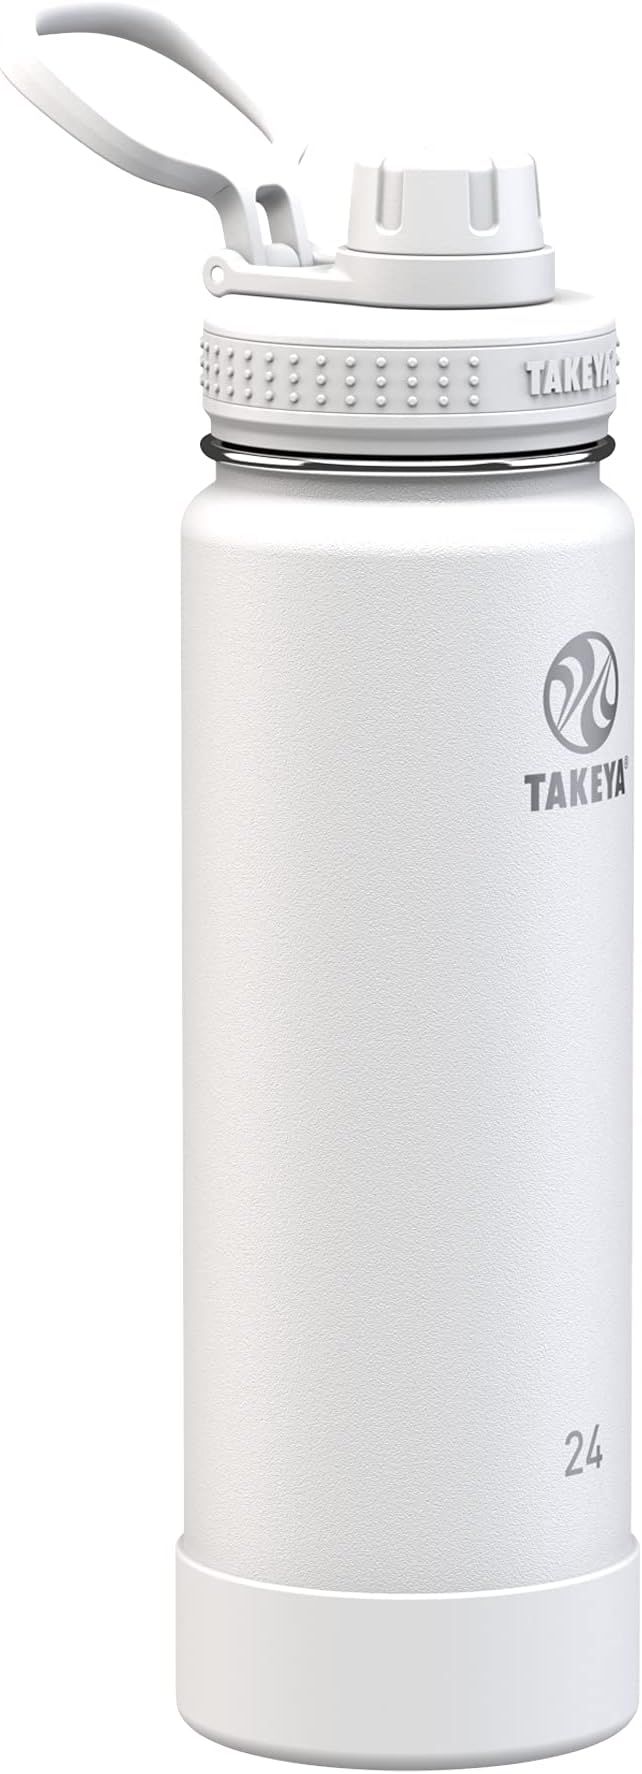 Takeya Actives Insulated Stainless Steel Water Bottle with Spout Lid, 24 Ounce, Arctic | Amazon (US)